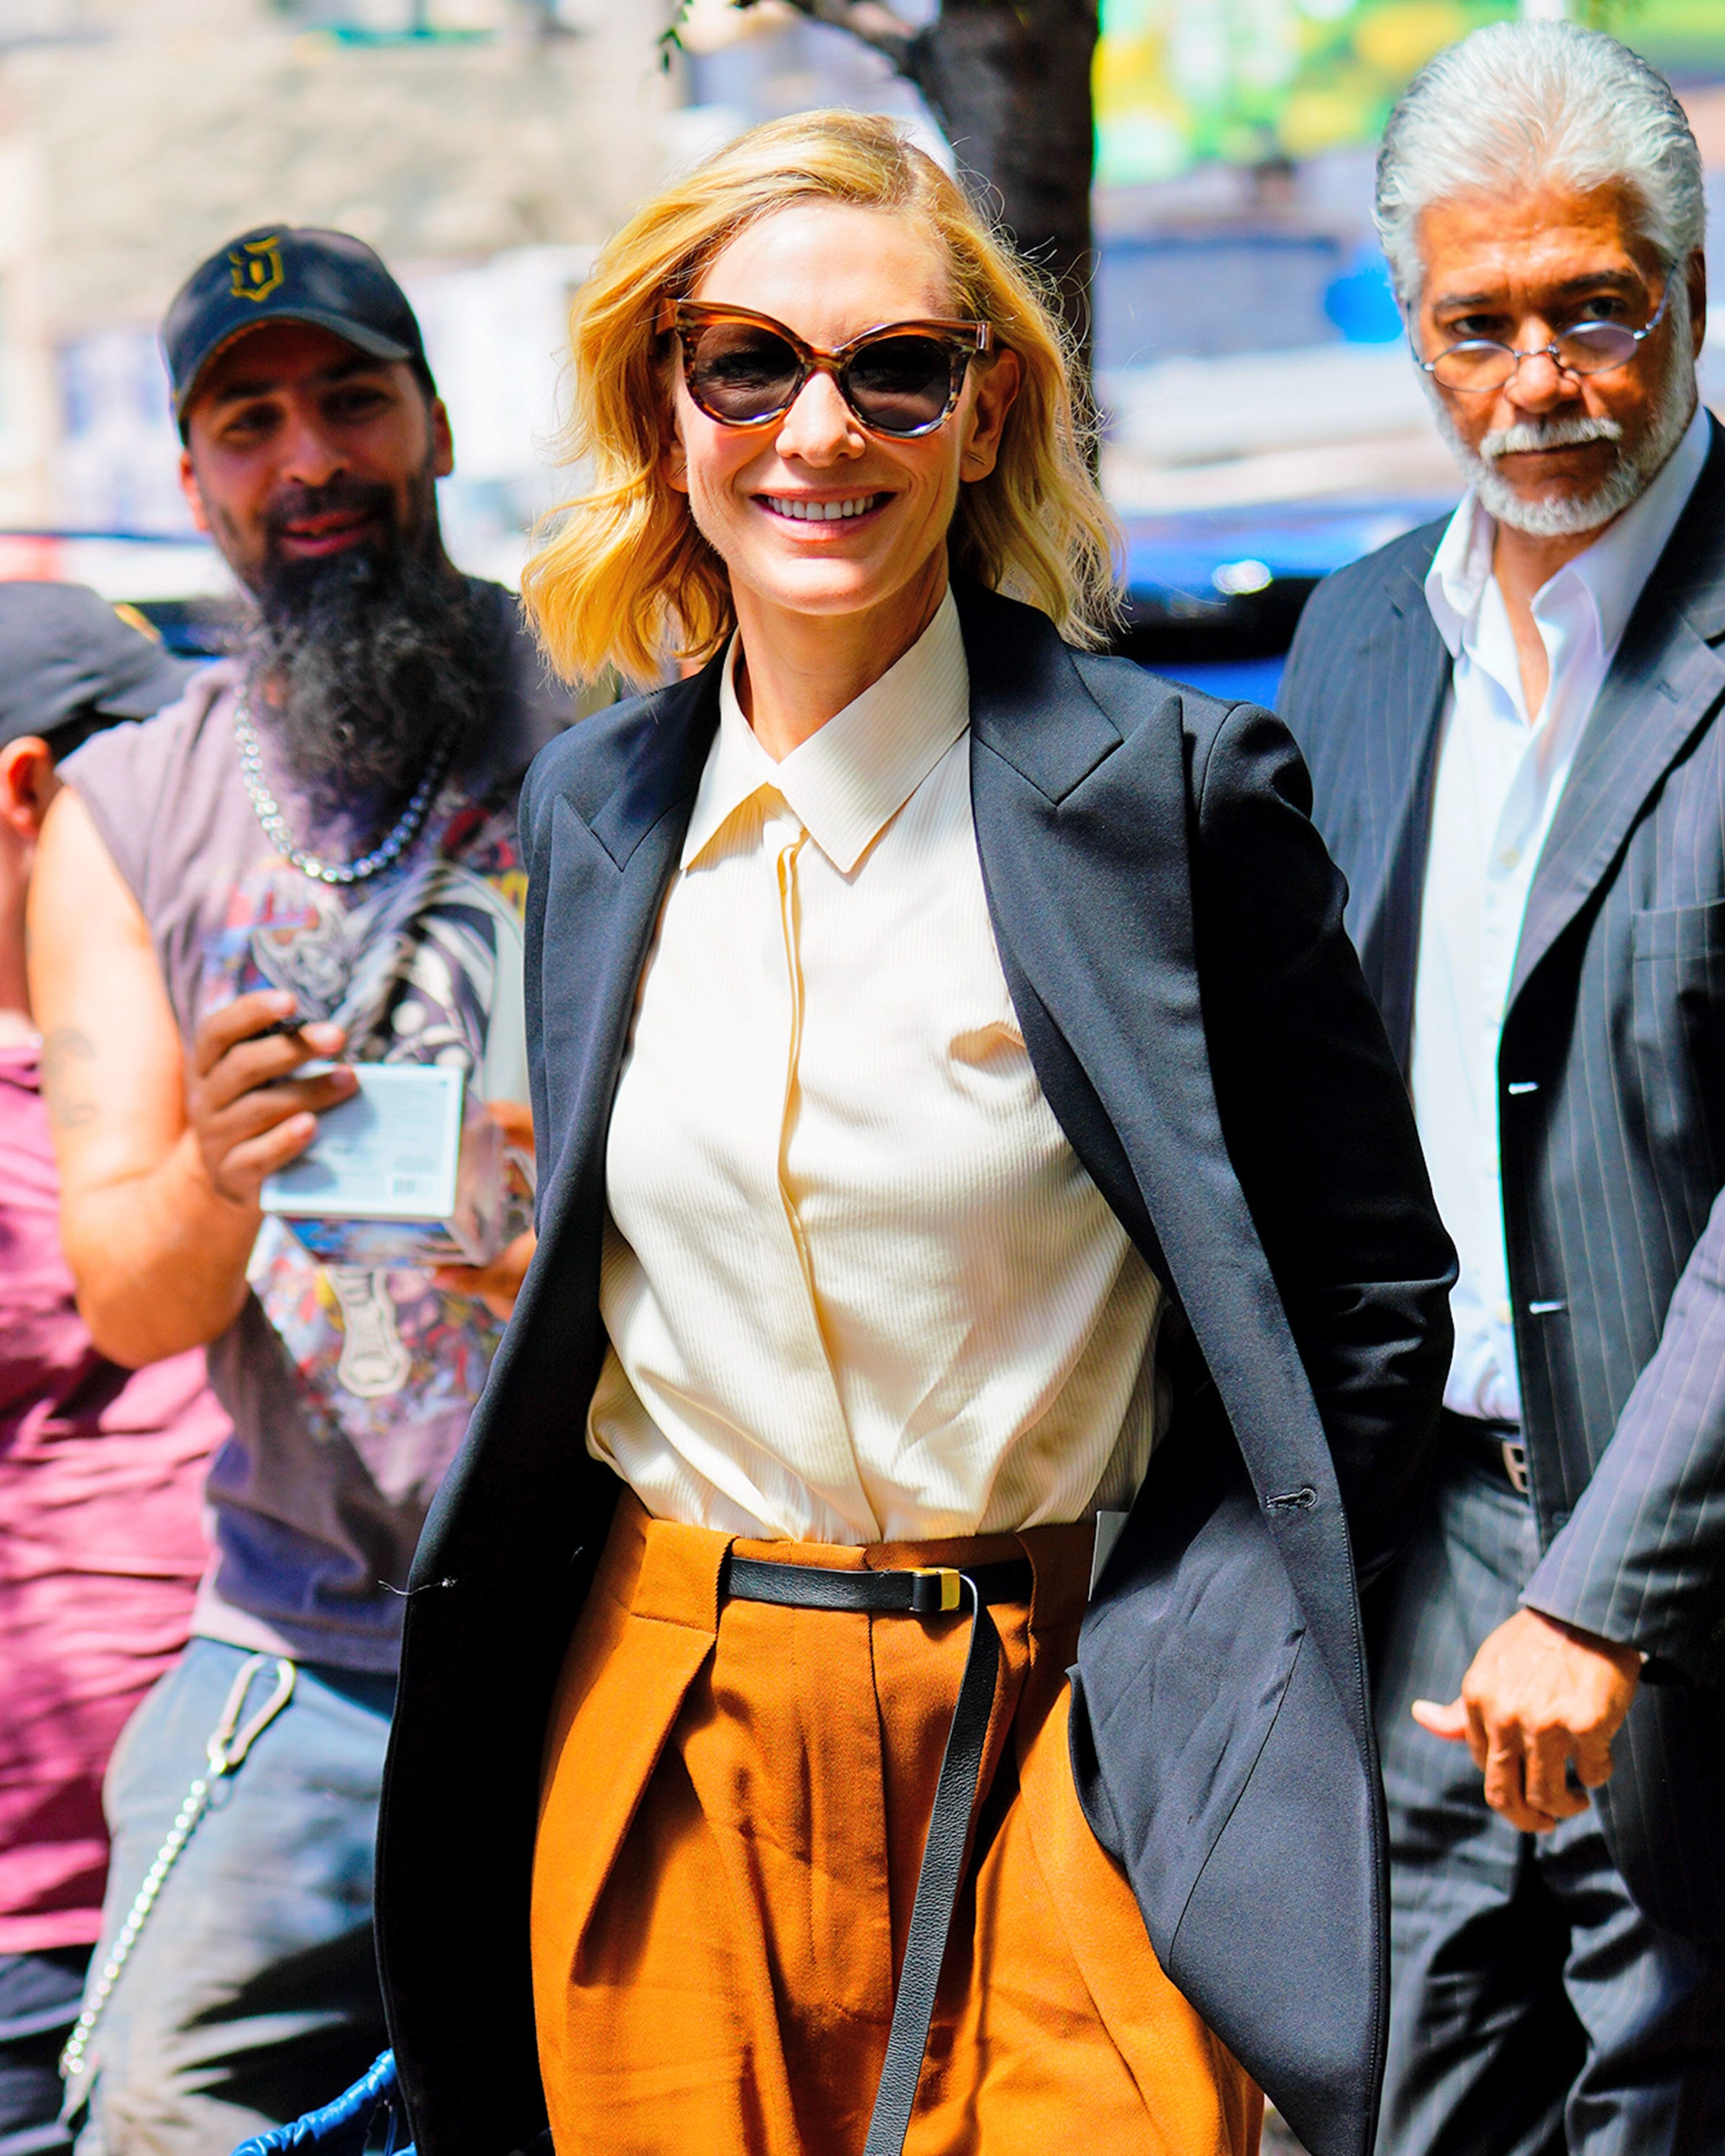 Cate Blanchett Wears Pantsuit With Blue Sleeves and Huge Shoulder Pads